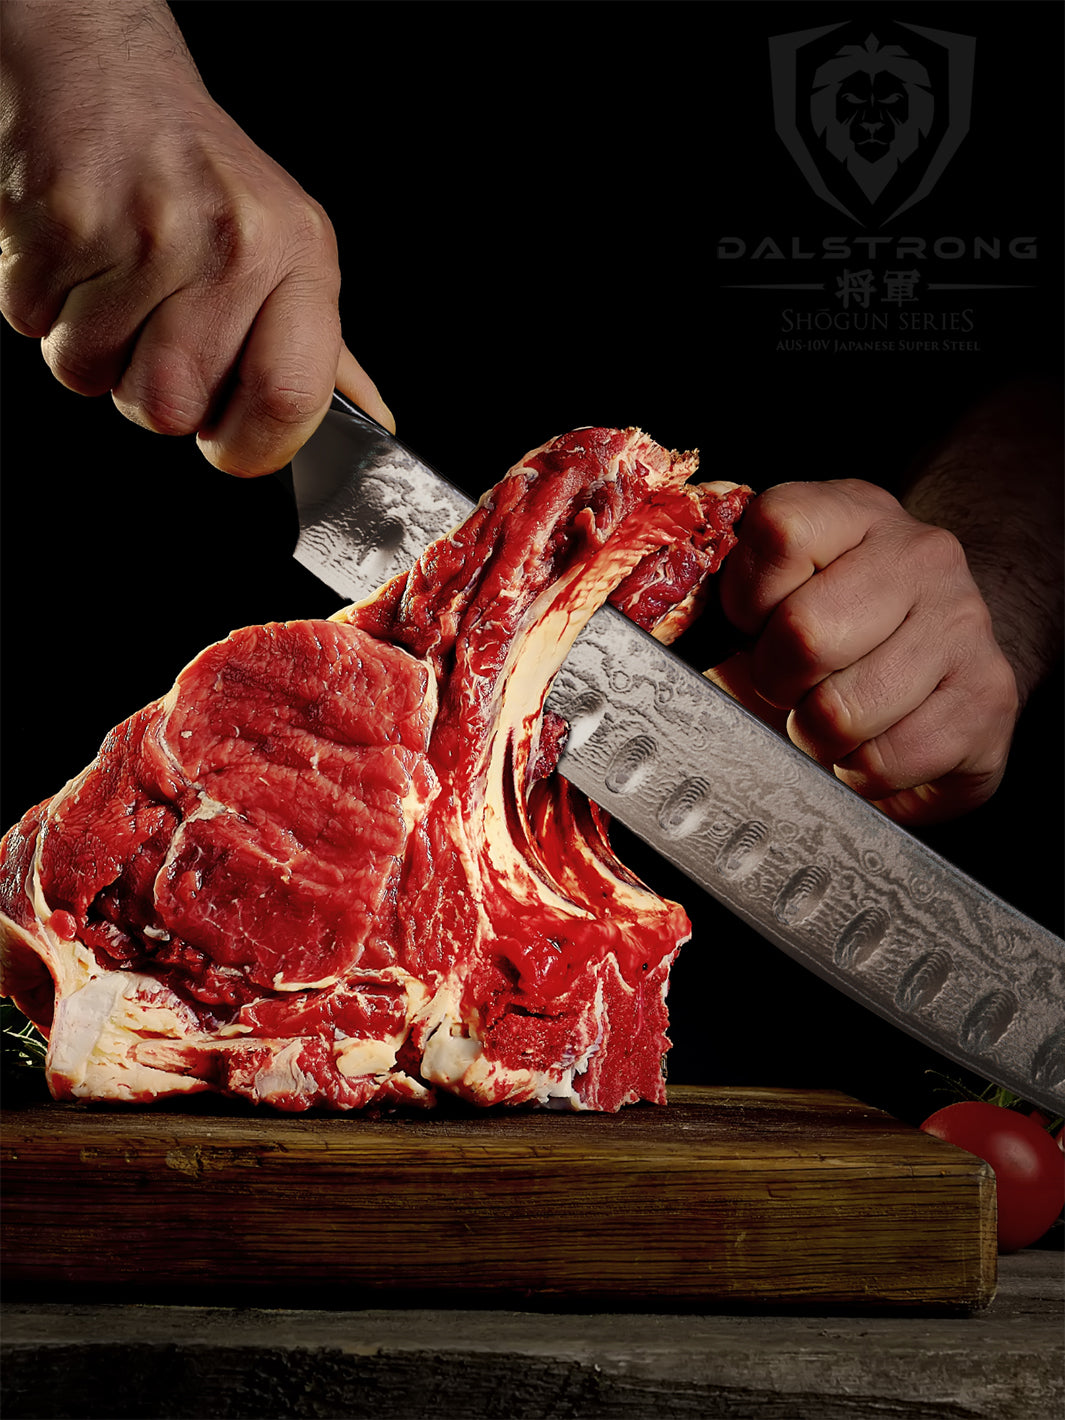 Dalstrong - Shogun Series Slicer - Japanese AUS-10V Super Steel - Vacuum Treated - Guard Included (10 inch Butcher-Breaking Cimitar Knife)